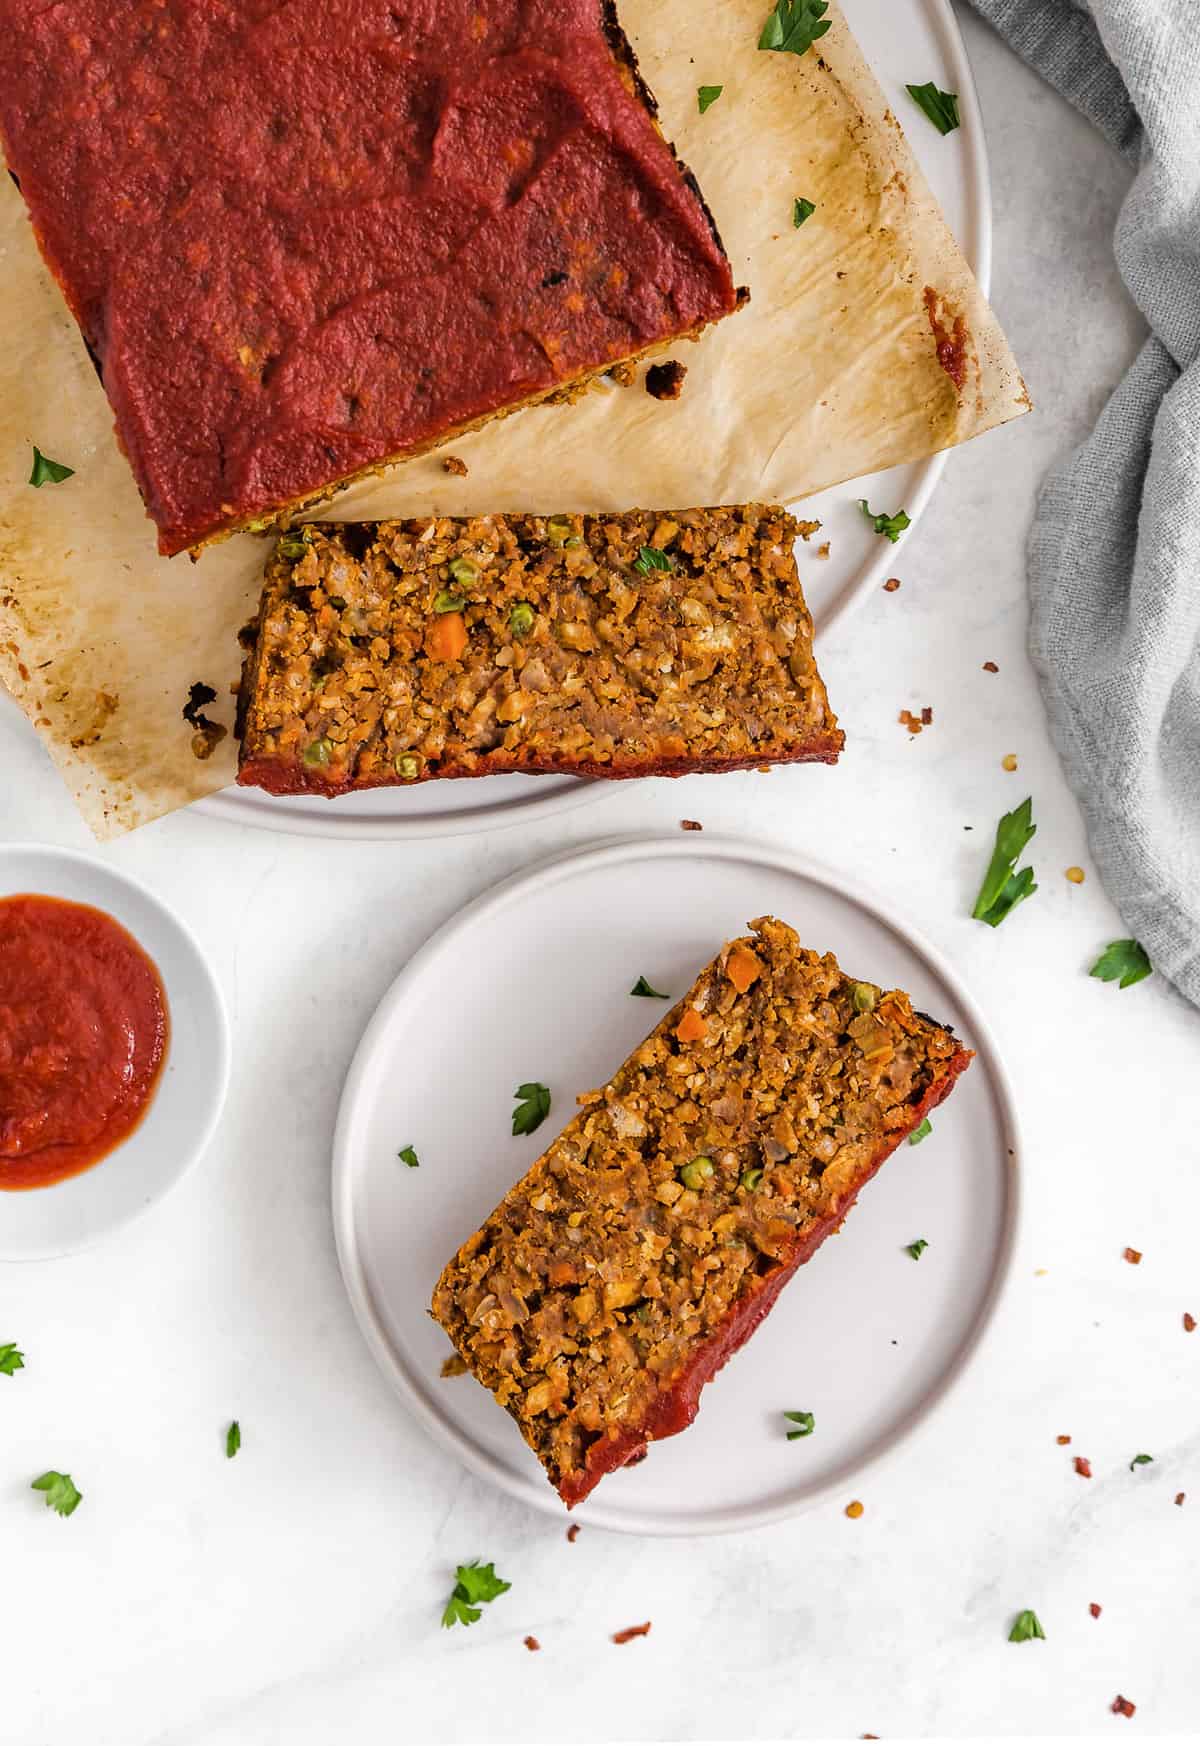 Veggie Loaf, Vegan Vegan Meatloaf, chickpea loaf, vegan loaf, loaf, vegan dinner, plant based, vegan, vegetarian, whole food plant based, gluten free, recipe, wfpb, healthy, healthy vegan, oil free, no refined sugar, no oil, refined sugar free, dairy free, dairy, holiday entree, holiday, traditional recipe, healthy recipe, dinner